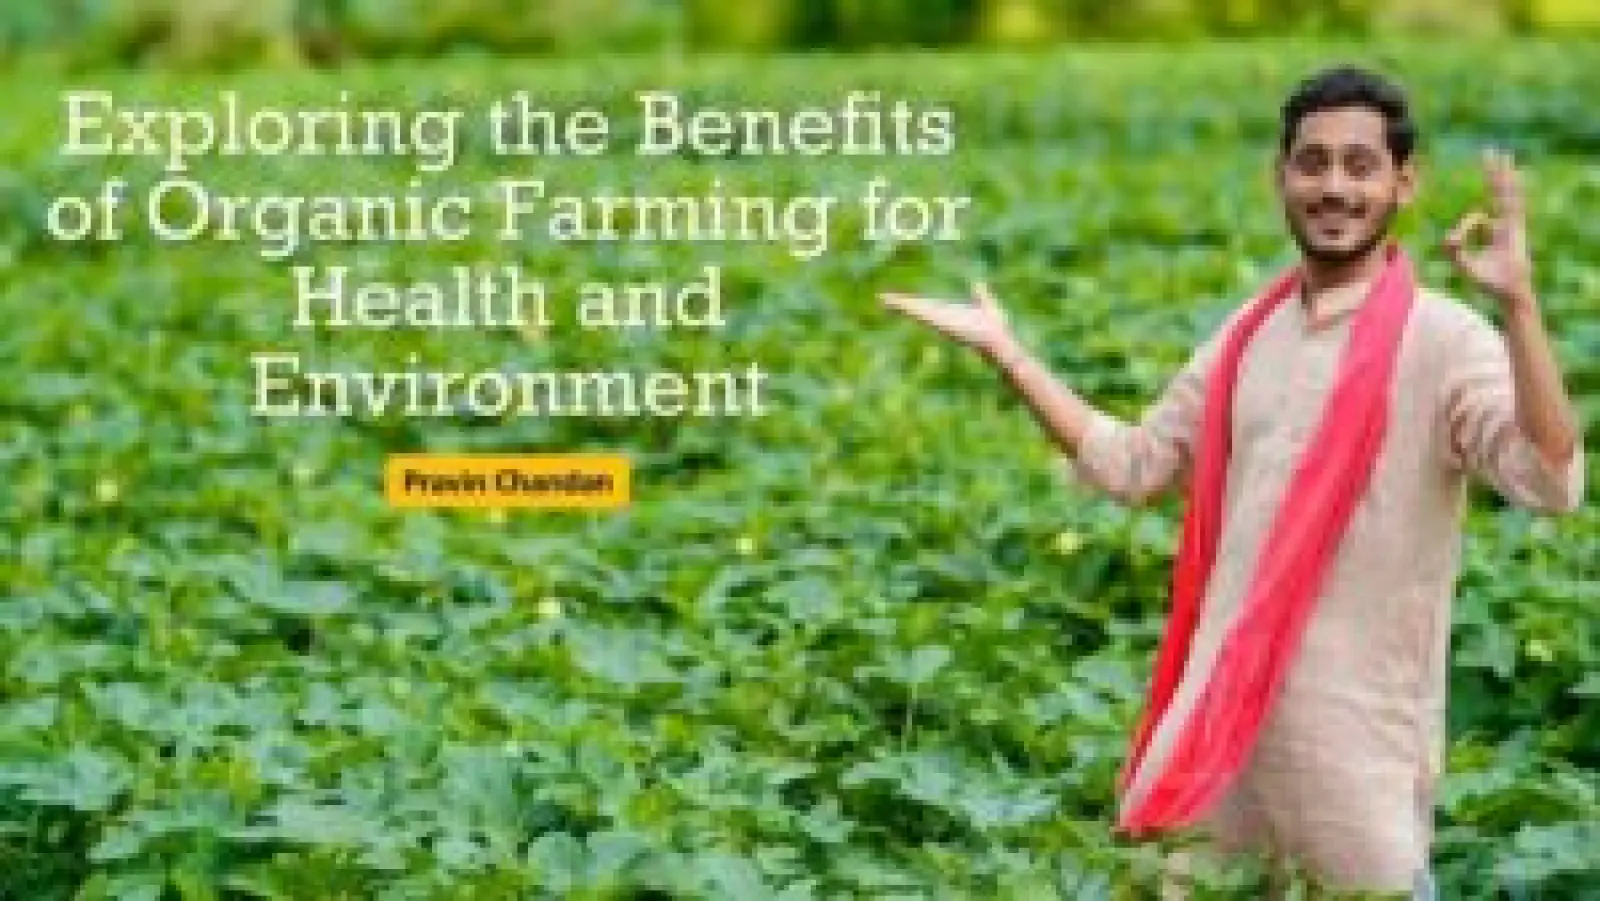 Exploring the Benefits of Organic Farming for Health and Environment